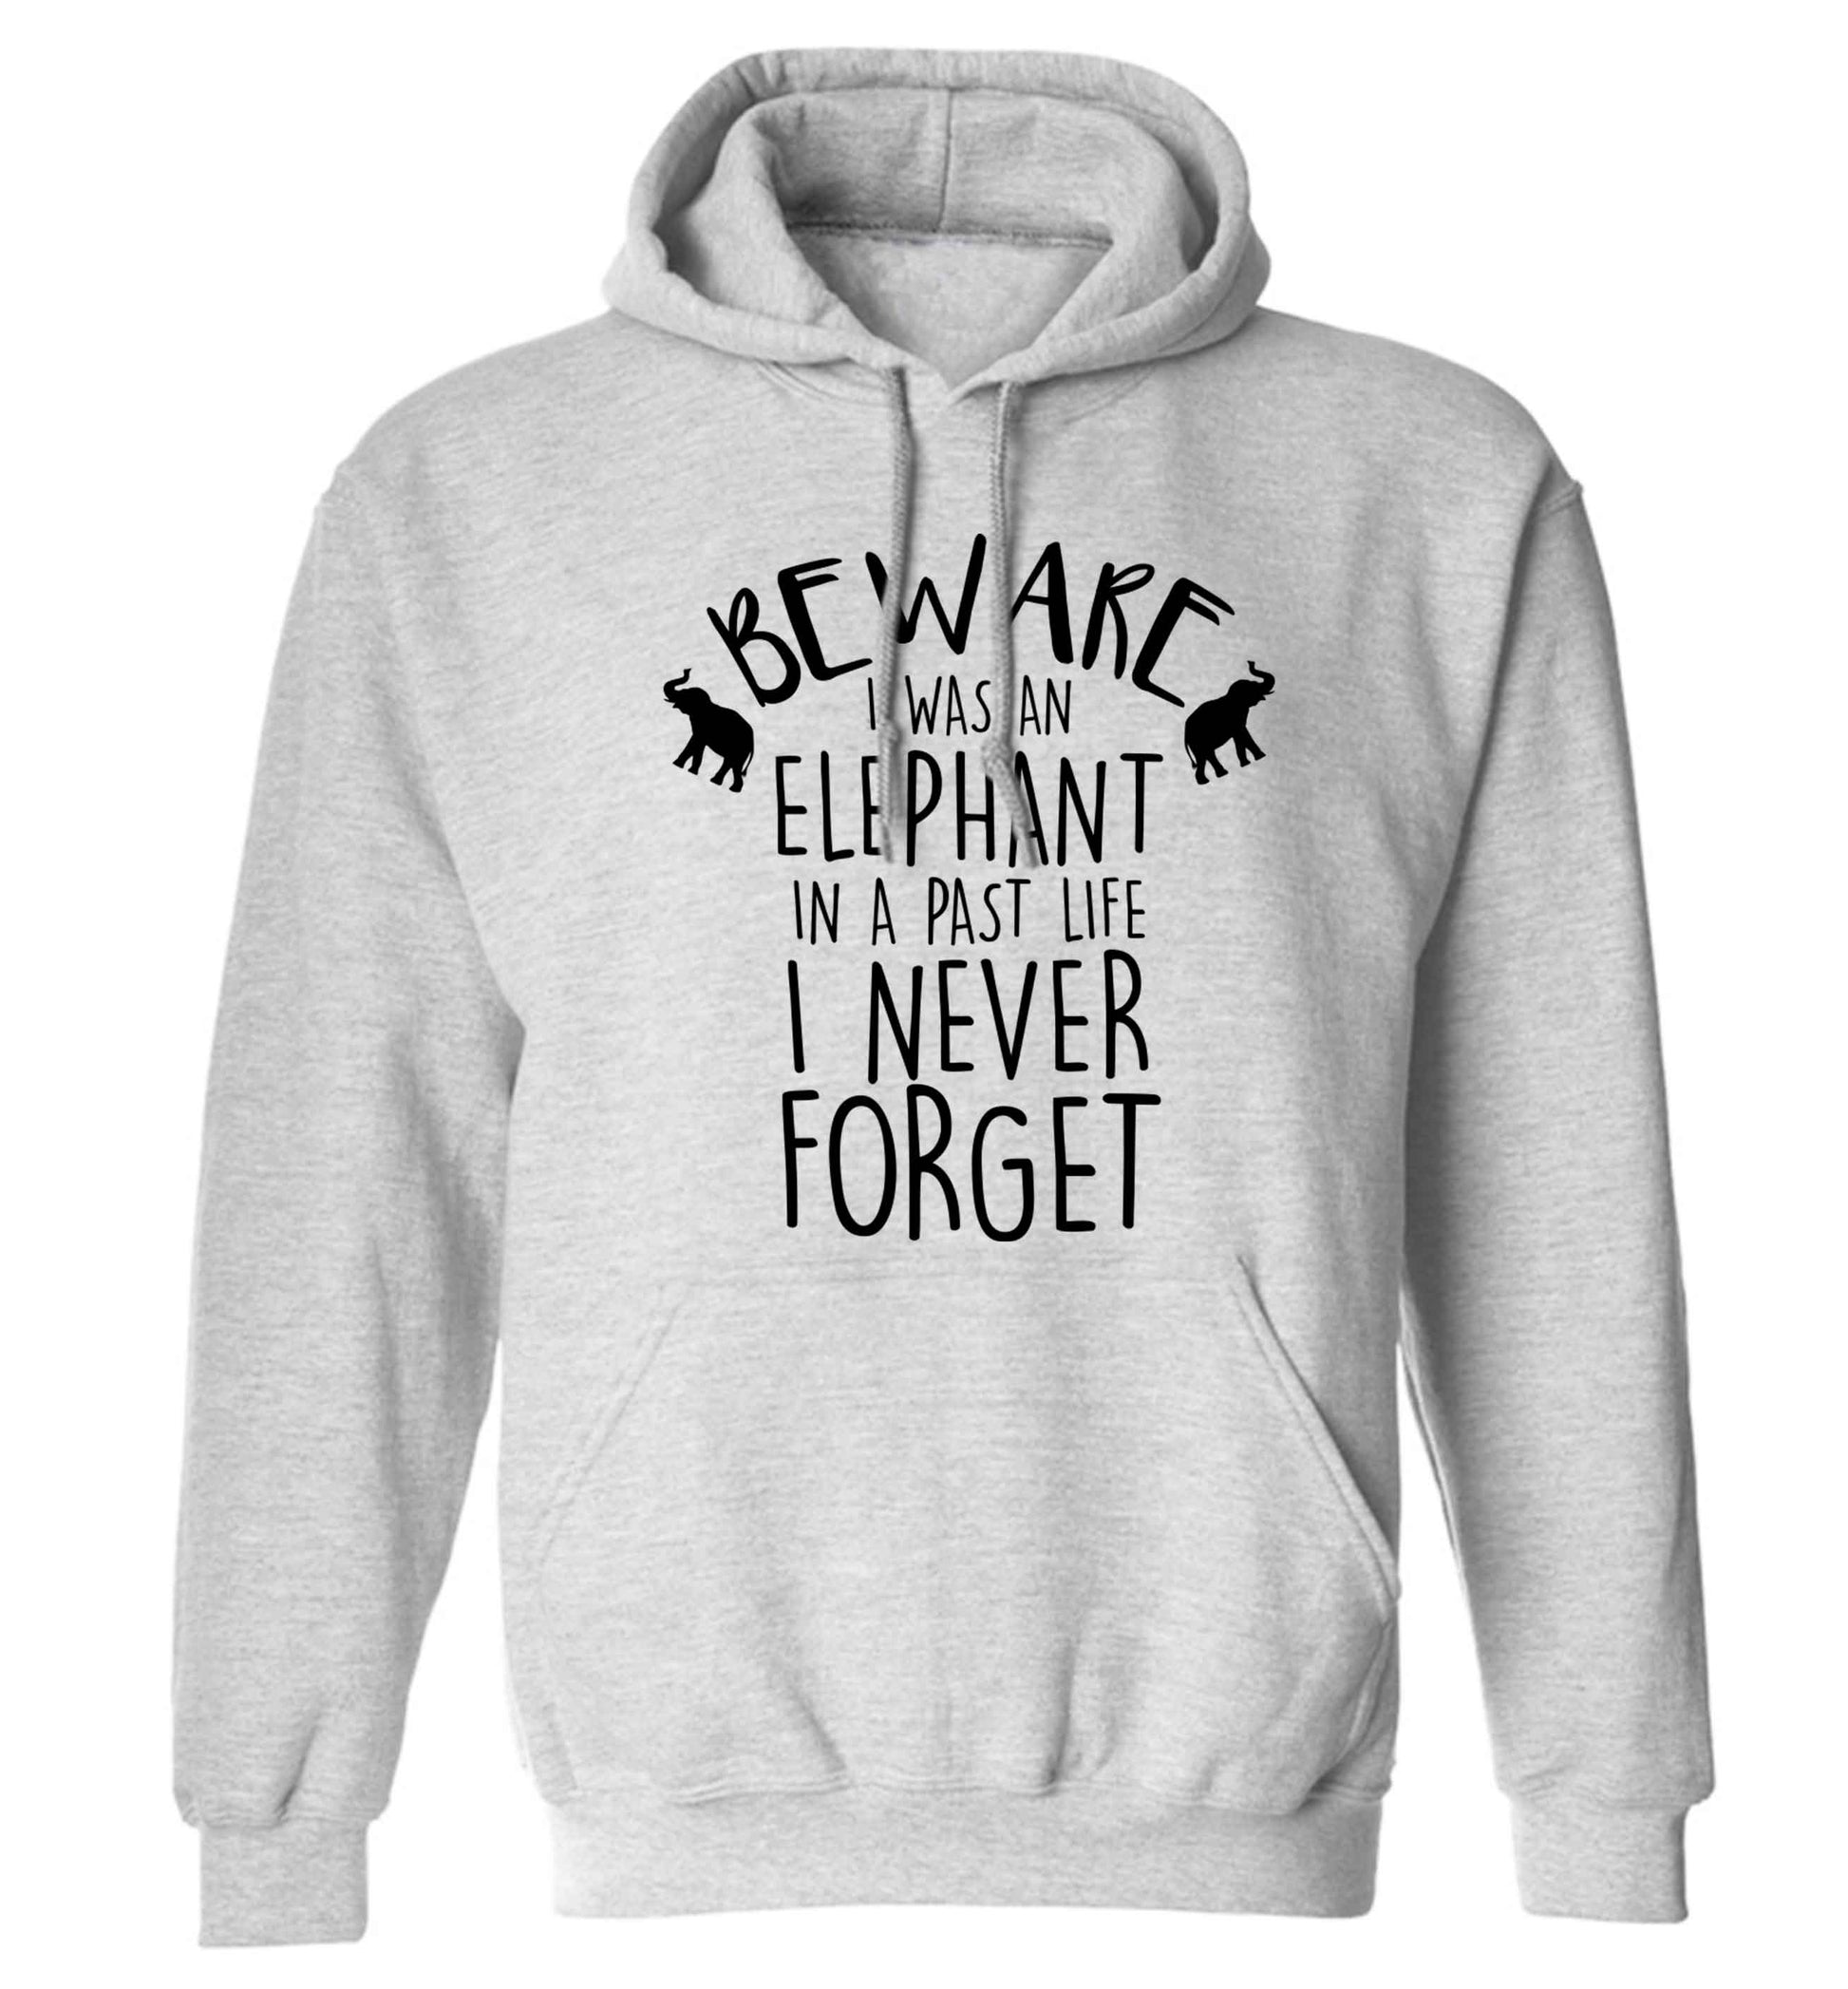 Beware I was an elephant in my past life I never forget adults unisex grey hoodie 2XL